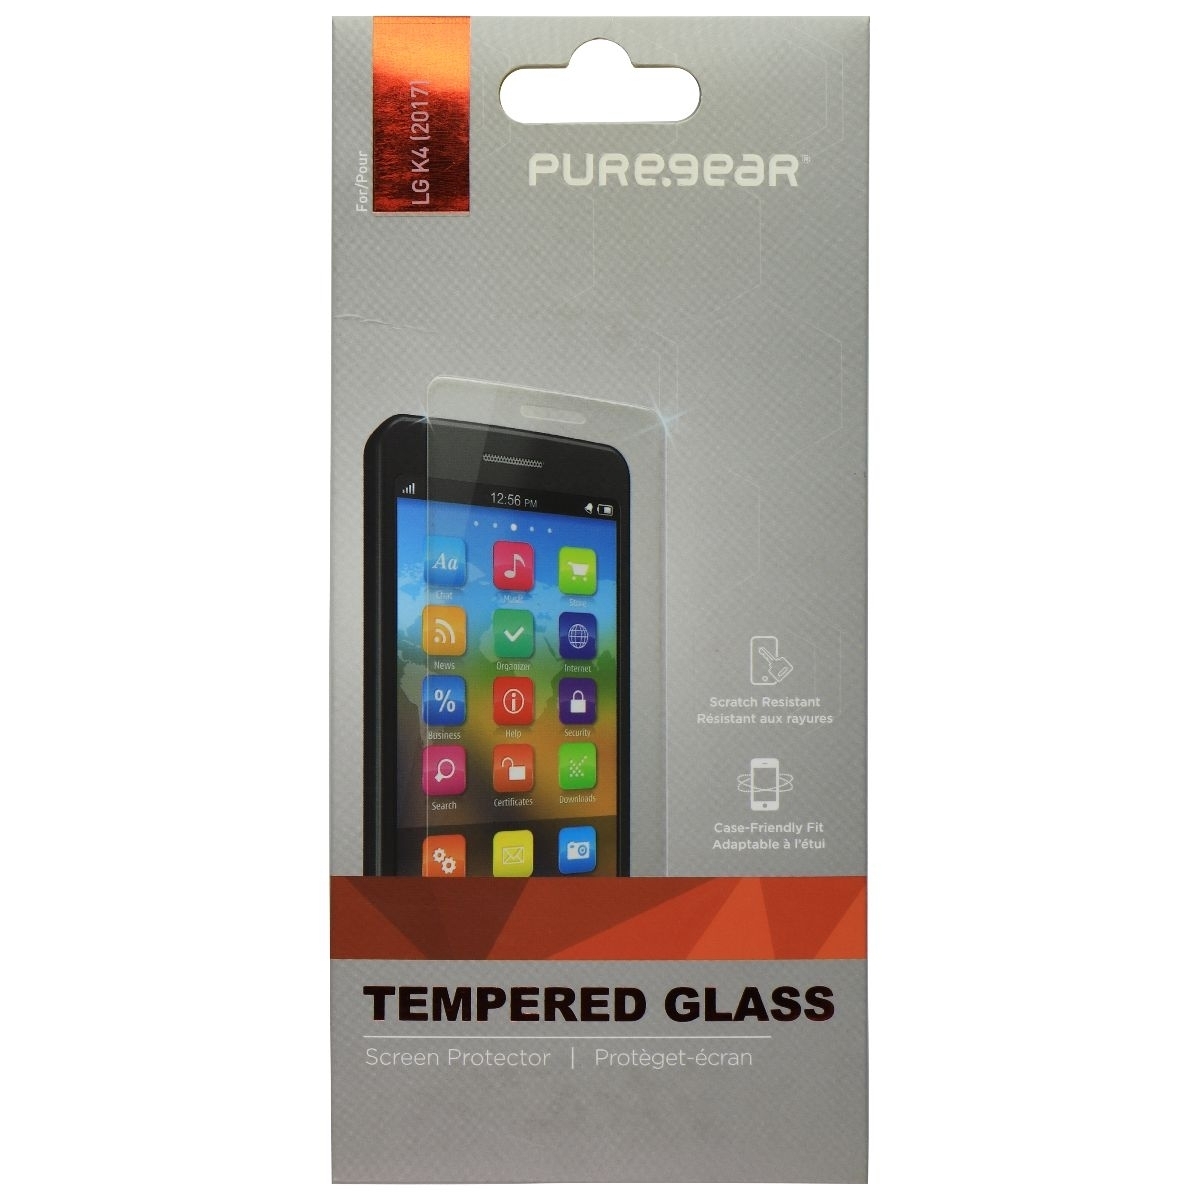 PureGear Tempered Glass Screen Protector For LG K4 (2017) - Clear (Refurbished)